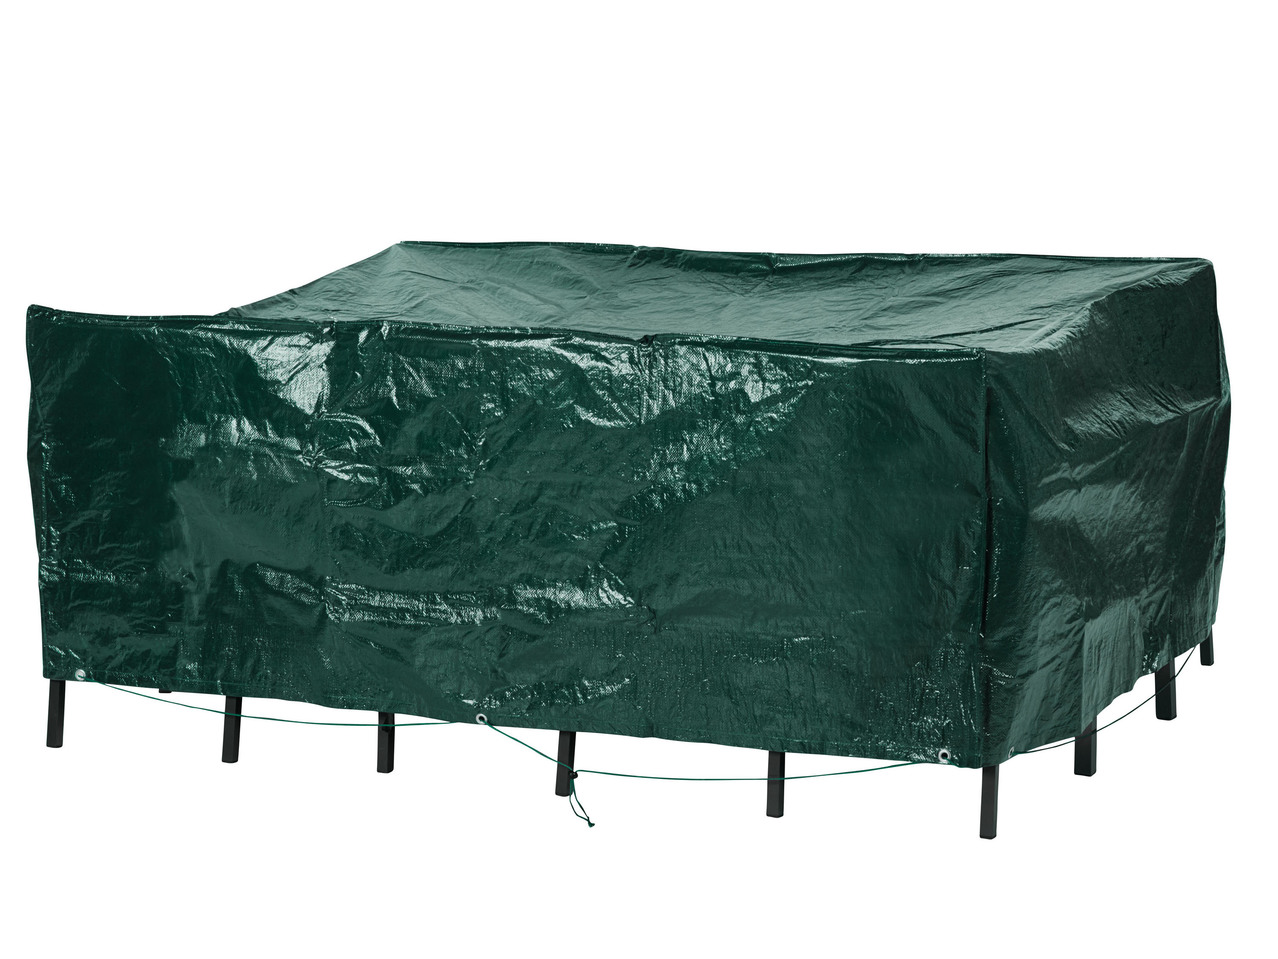 Protective Cover for Garden Table or Multi-Purpose Cover